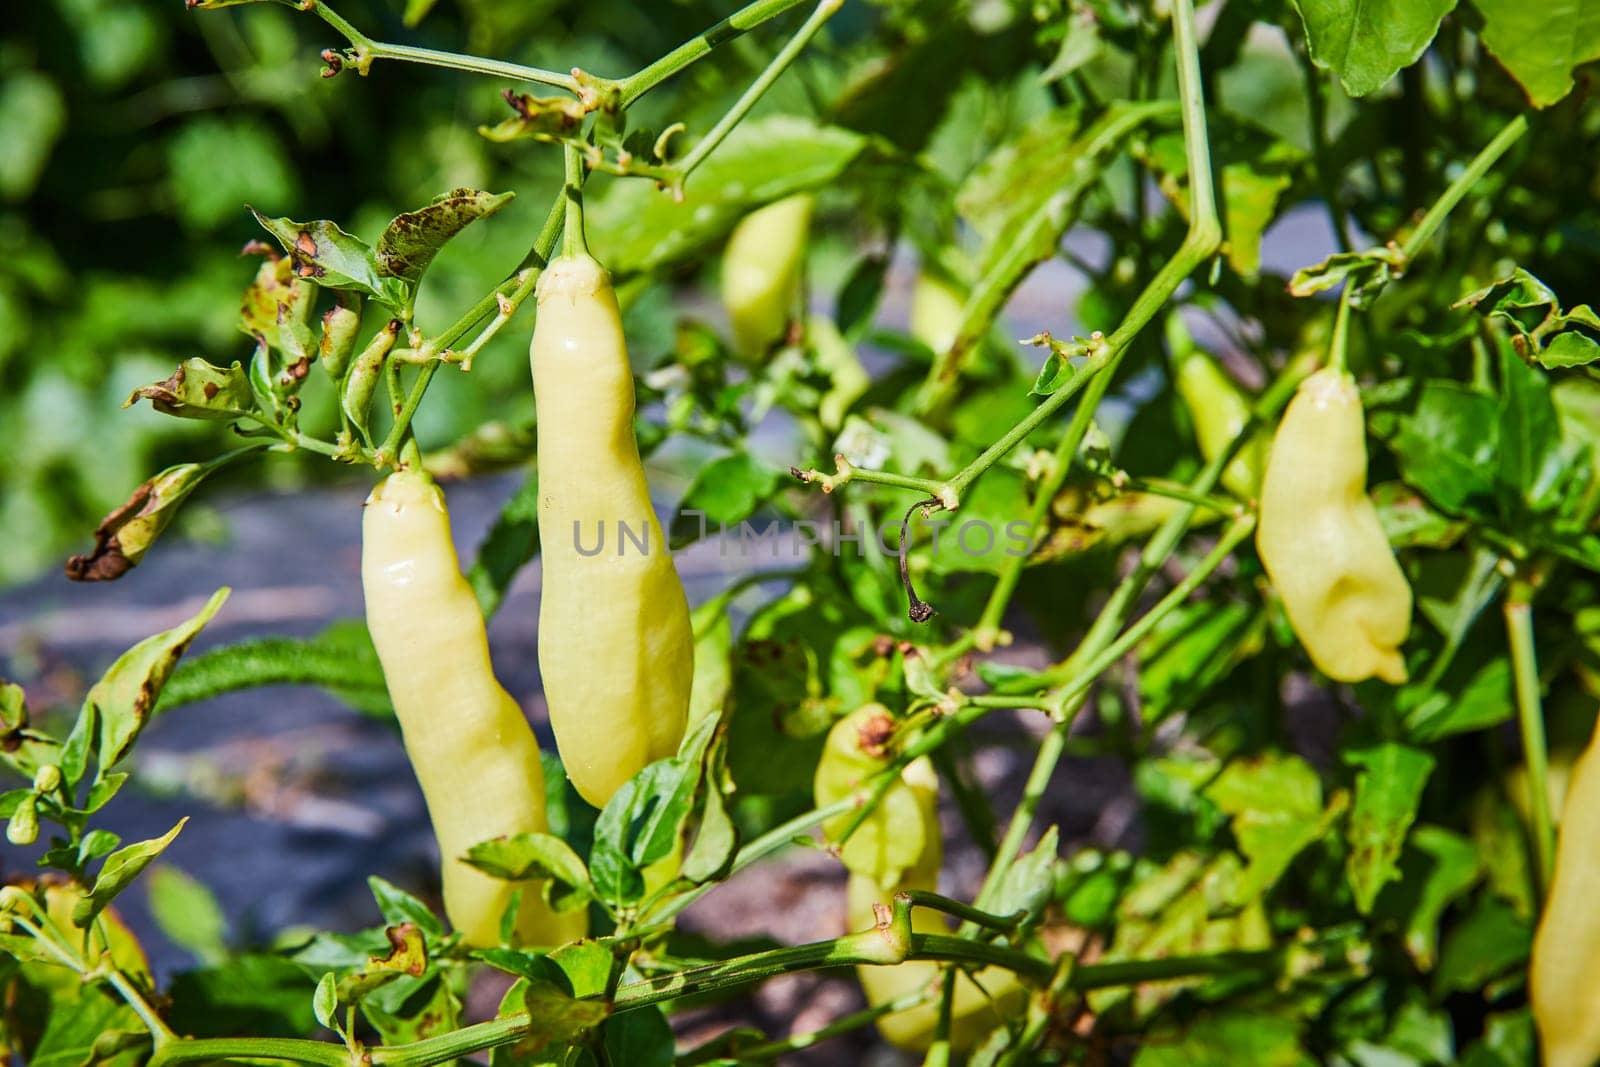 Vibrant yellow chili peppers growing on lush plants in Elkhart's Botanic Gardens, Indiana, showcasing organic farming and natural freshness, 2023.